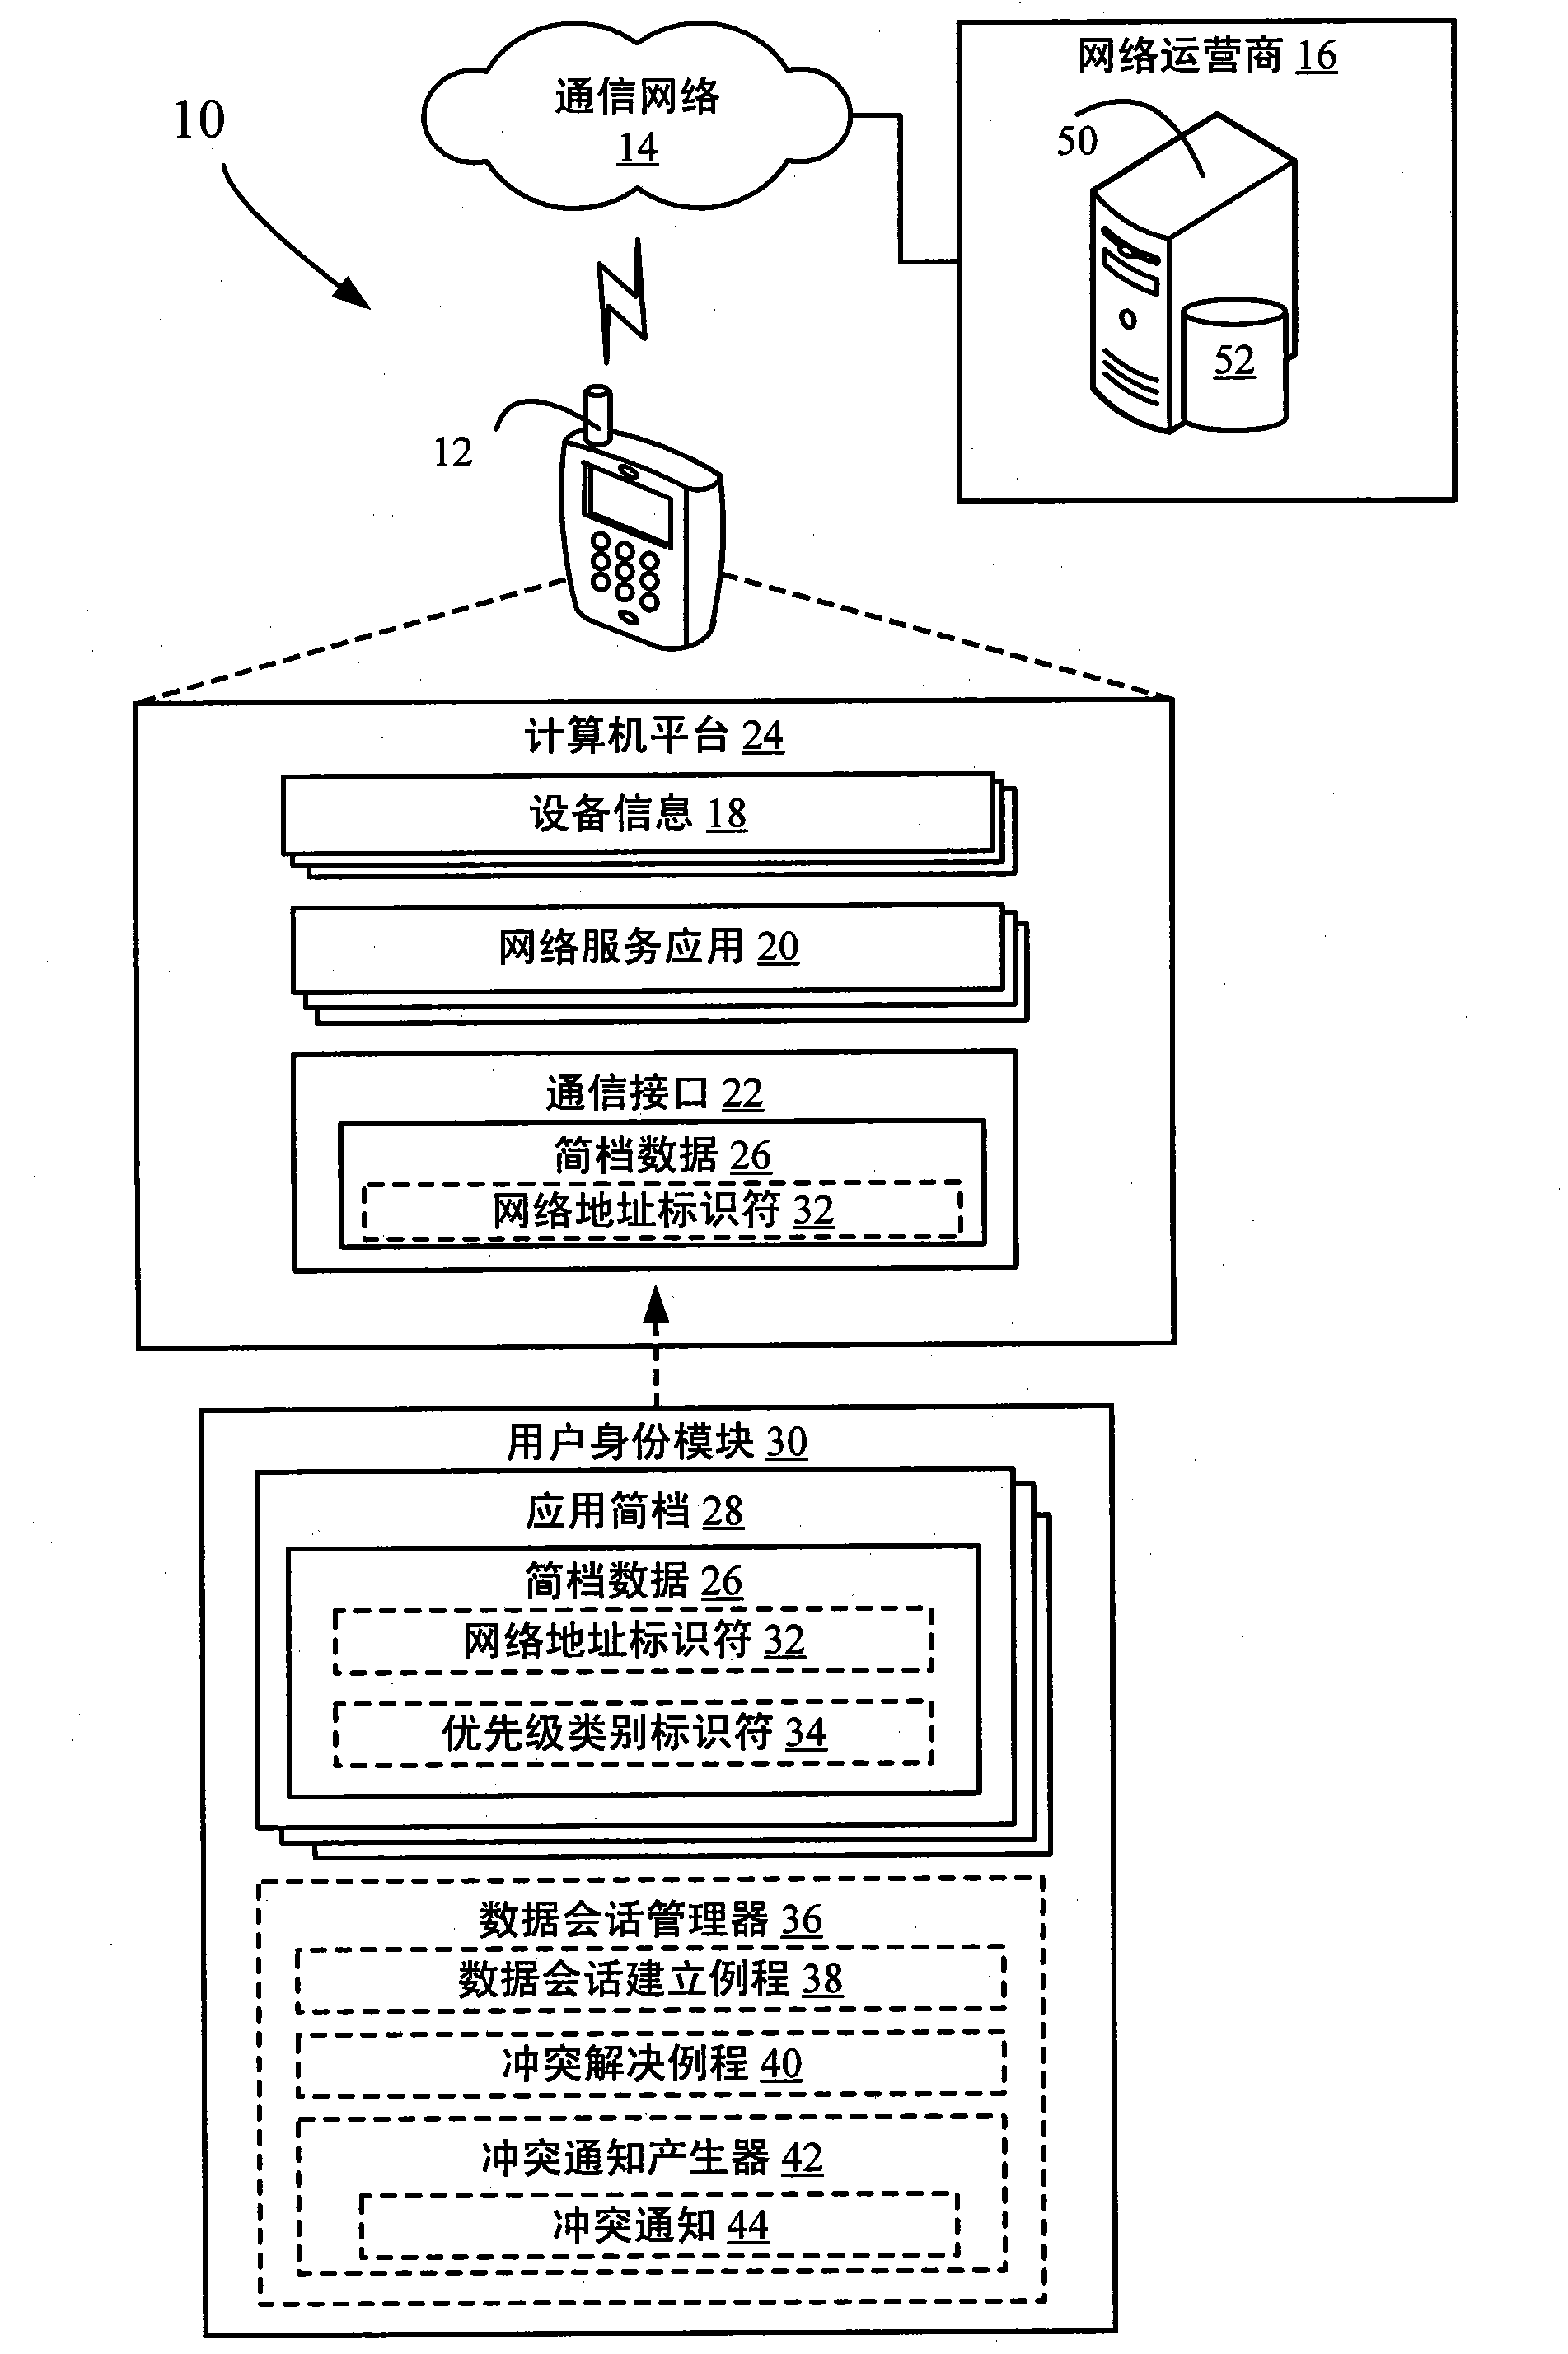 Systems and methods for provisioning wireless devices based on multiple network-service application profiles and data session conflict resolution